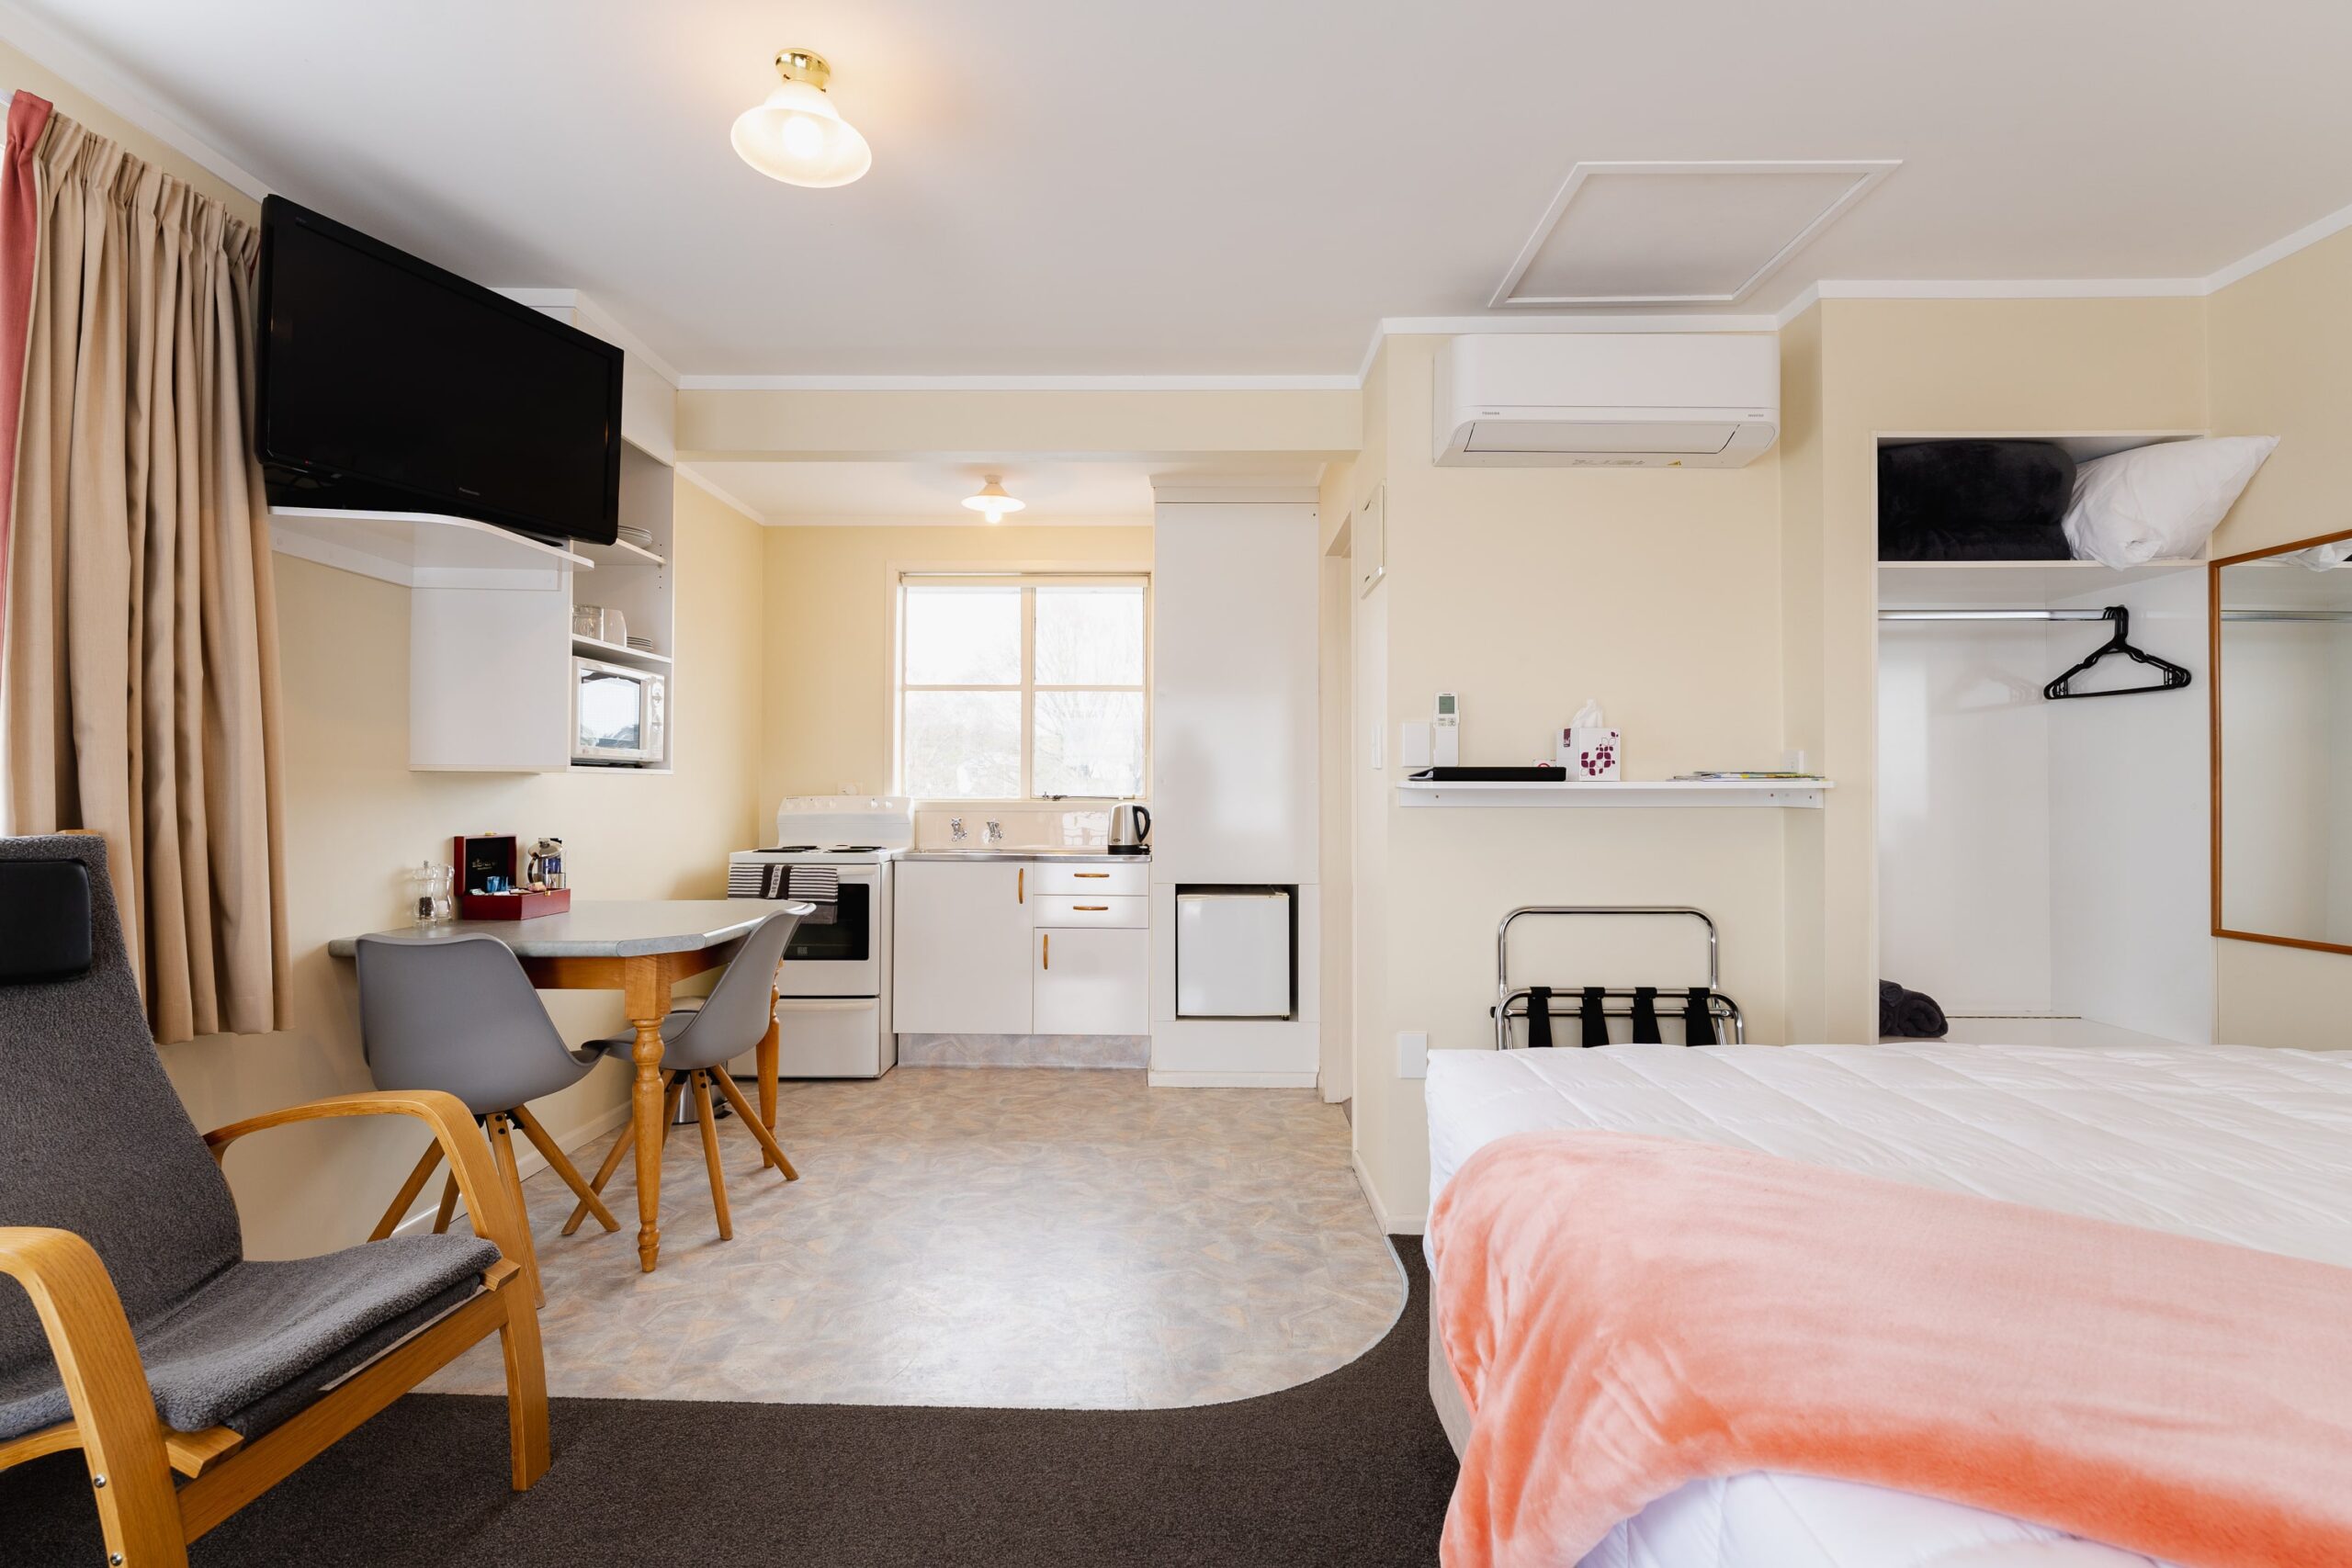 Highway Lodge Motel Accommodation in Balclutha - Queen Single Studio Unit